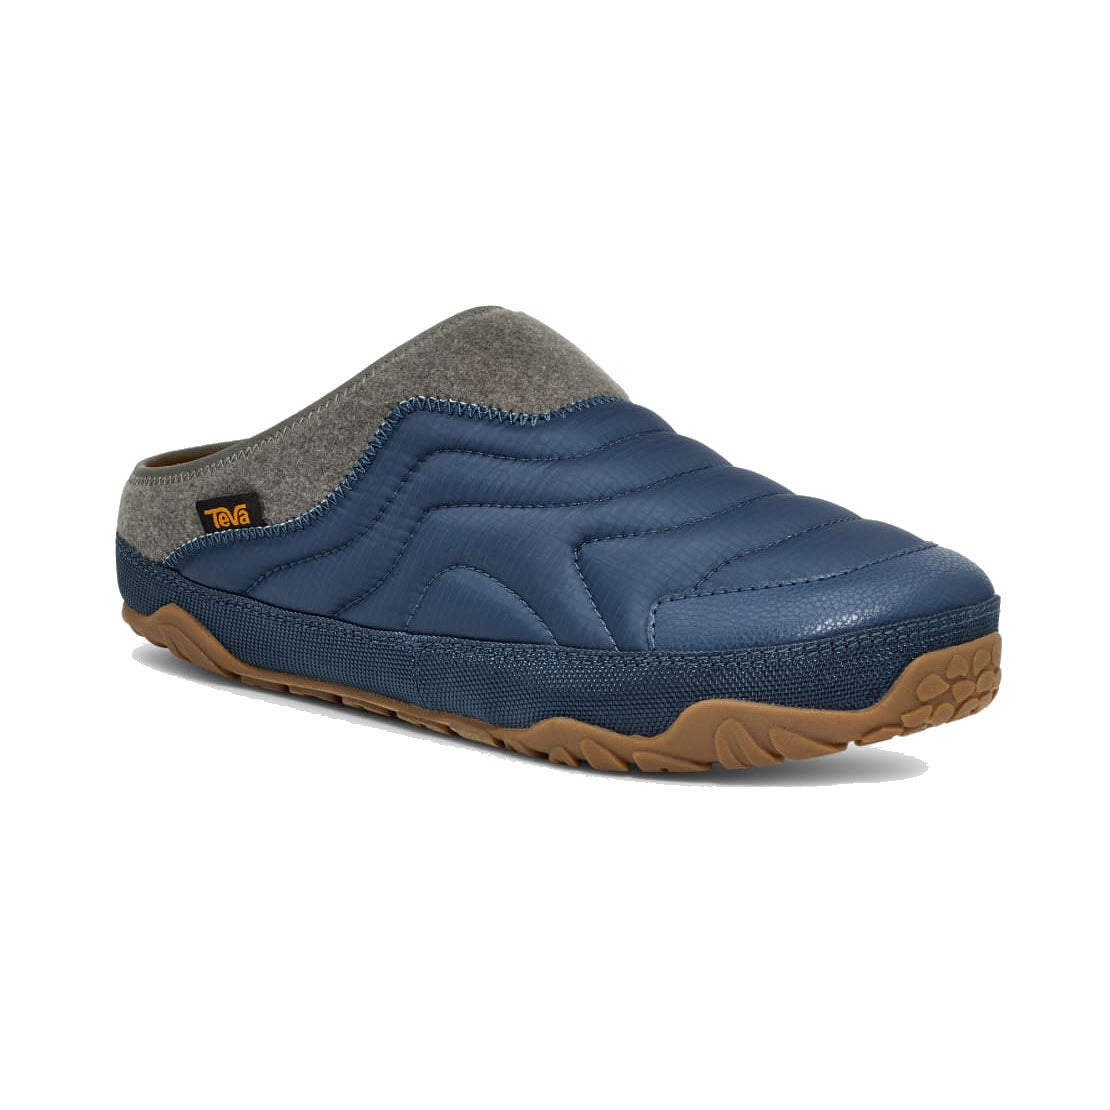 A single blue Teva REEMBER TERRAIN slip-on shoe with quilted stitching and a tan sole, featuring a small logo tag on the side.